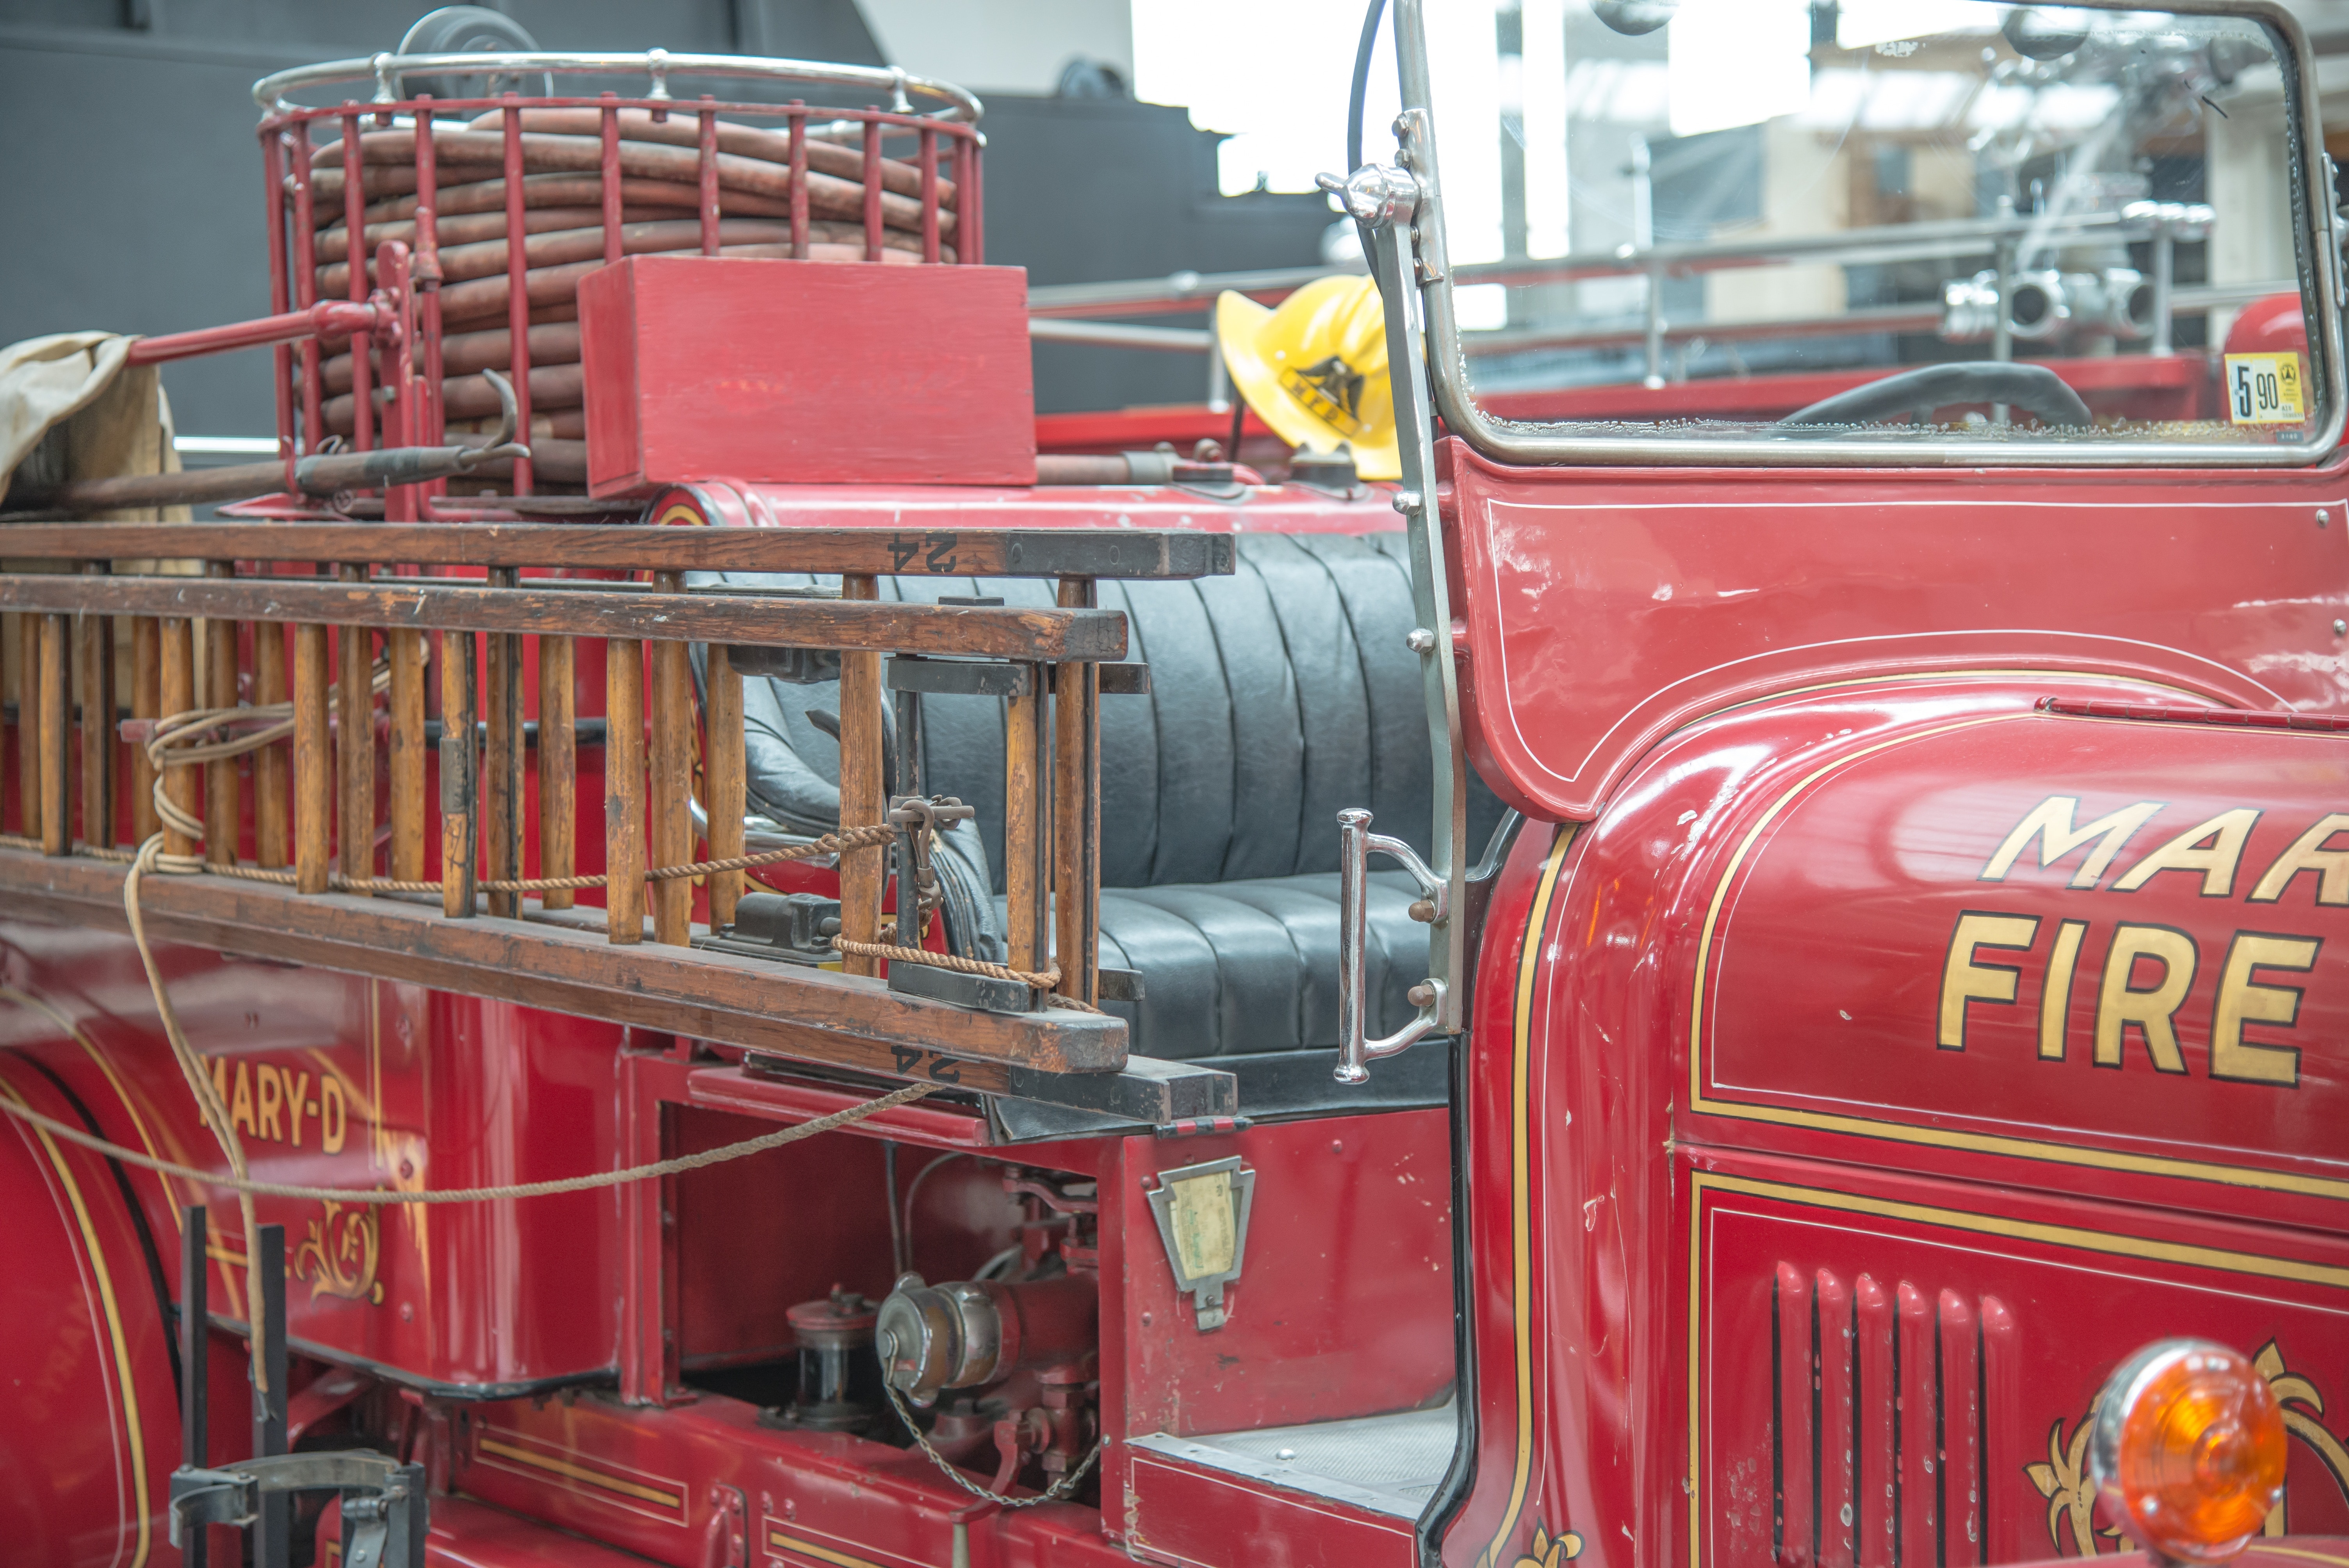 Fire Truck, Red, Antique, Fire, Retro, red, transportation